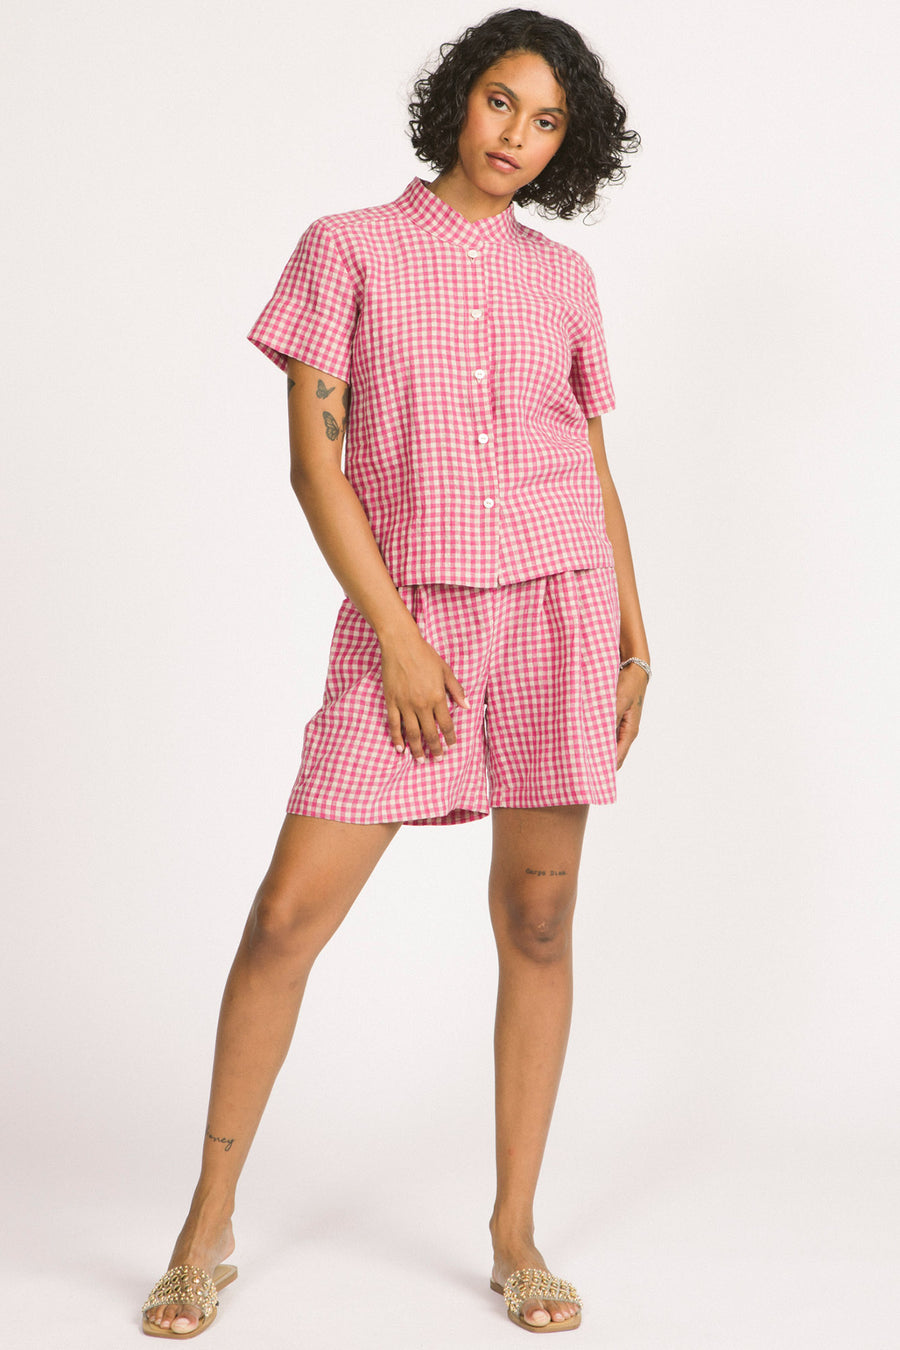 Woman wearing a pink and white linen gingham button up Elodie blouse by Allison Wonderland. 